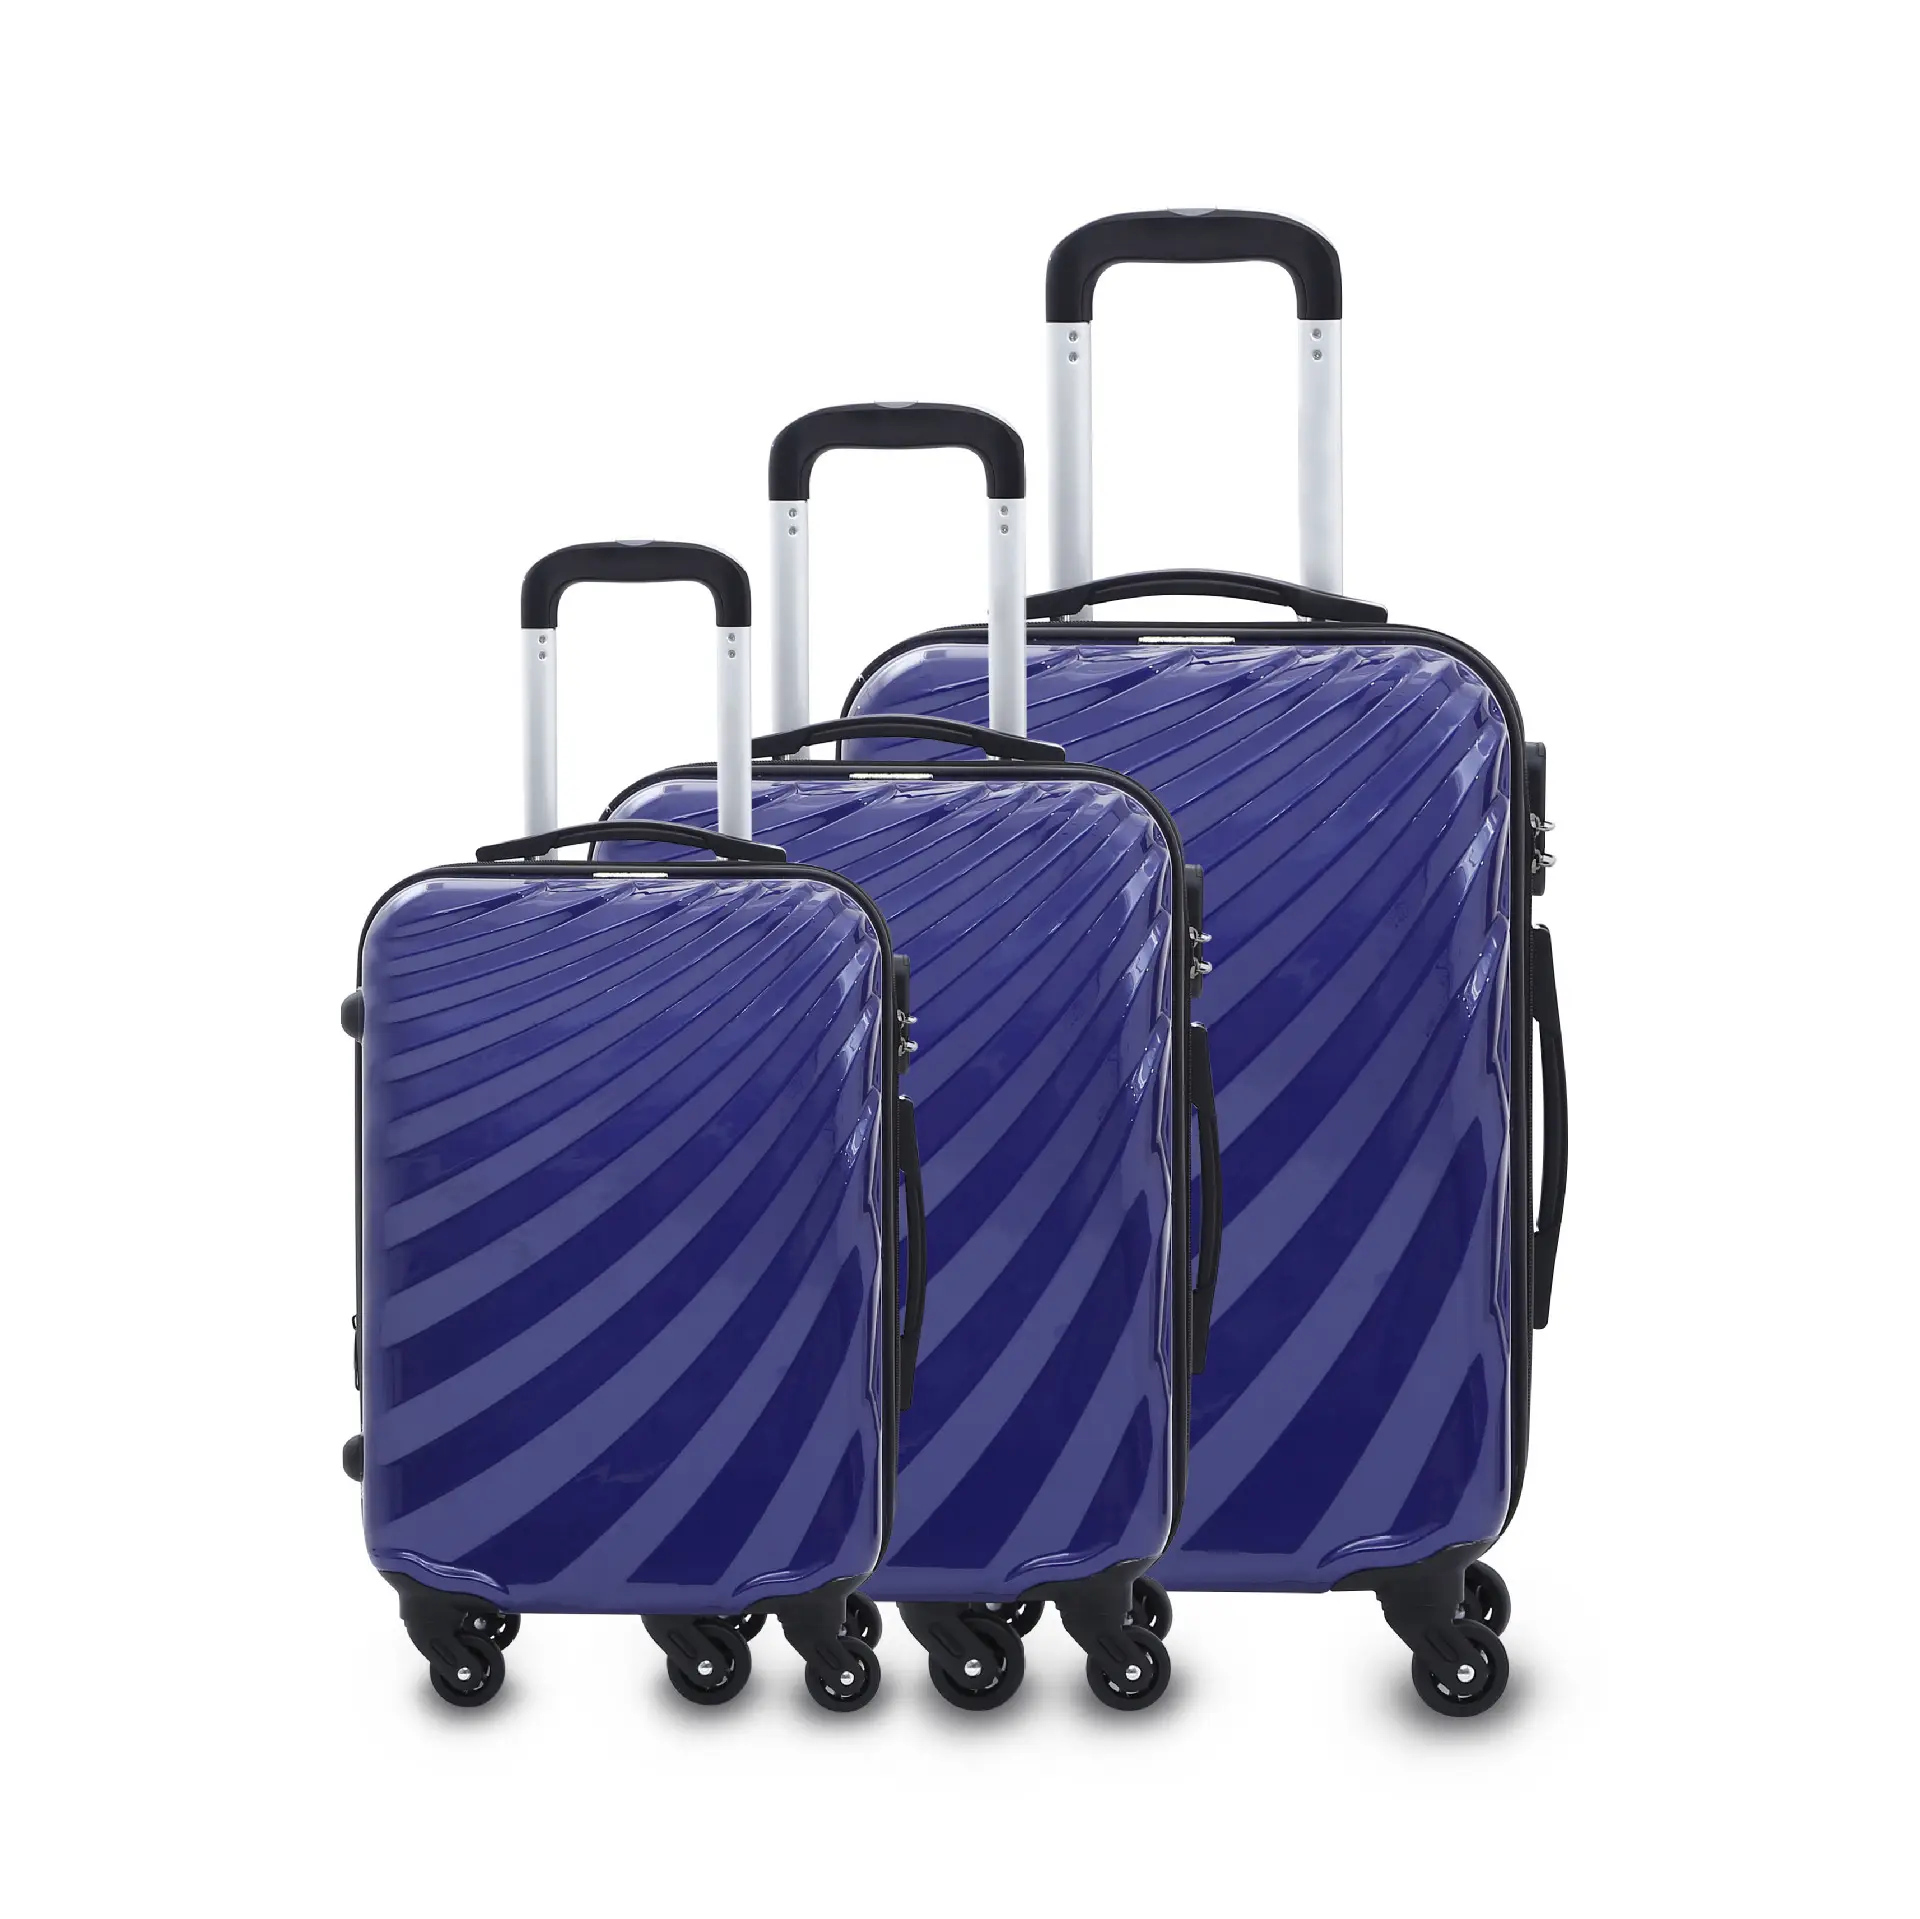 Wholesale Fashion Trolley Luggage Rolling Wheels 3 pcs Travel Carry On Suitcase Set For Male And Female